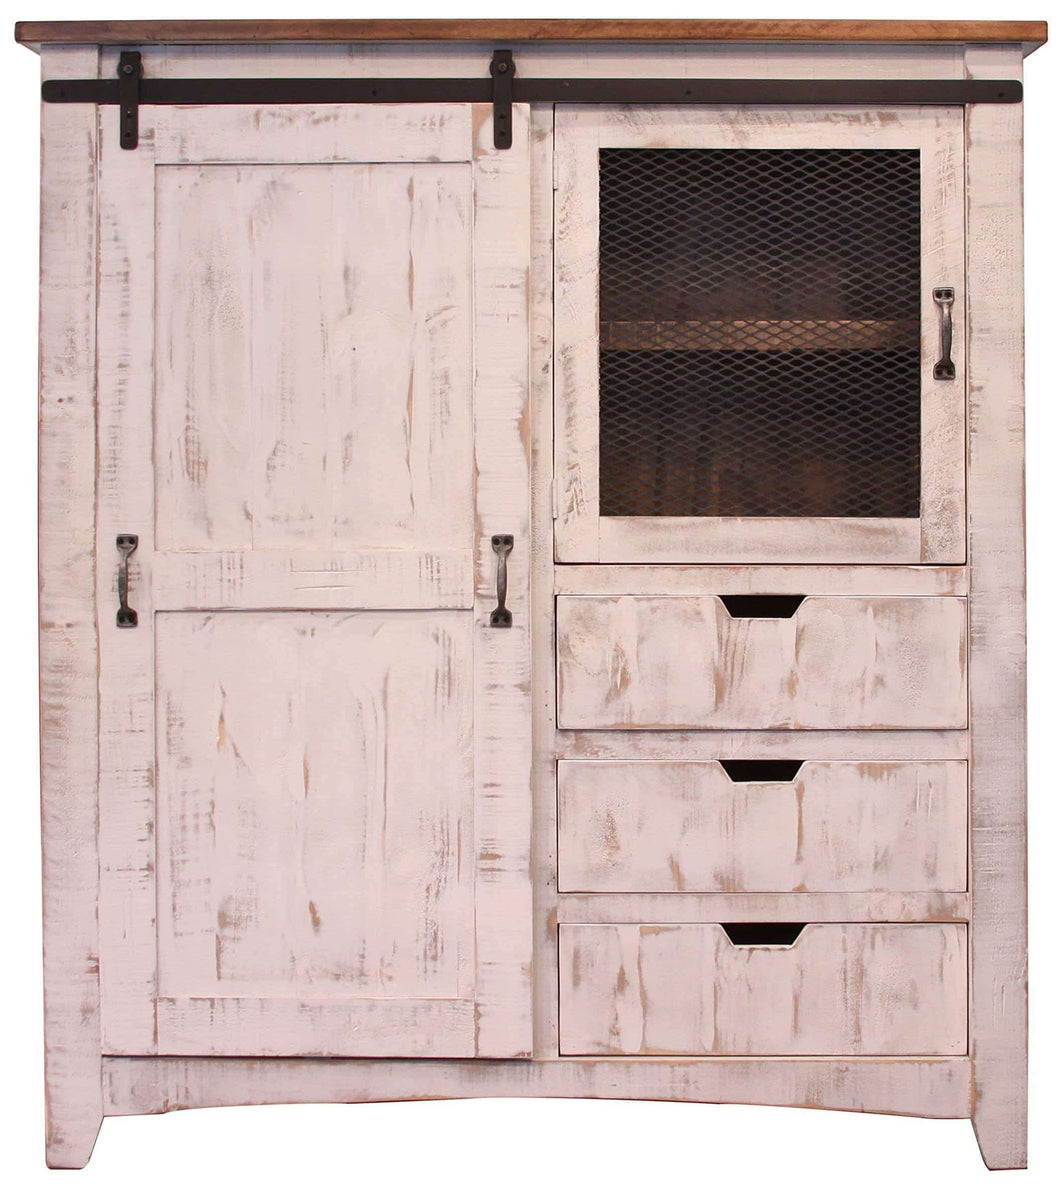 Heavy duty rr distressed white sturdy solid wood anton sliding barn door gentlemans chest armoire arrives fully assembled and features upgraded dovetail drawers with ball bearing glides